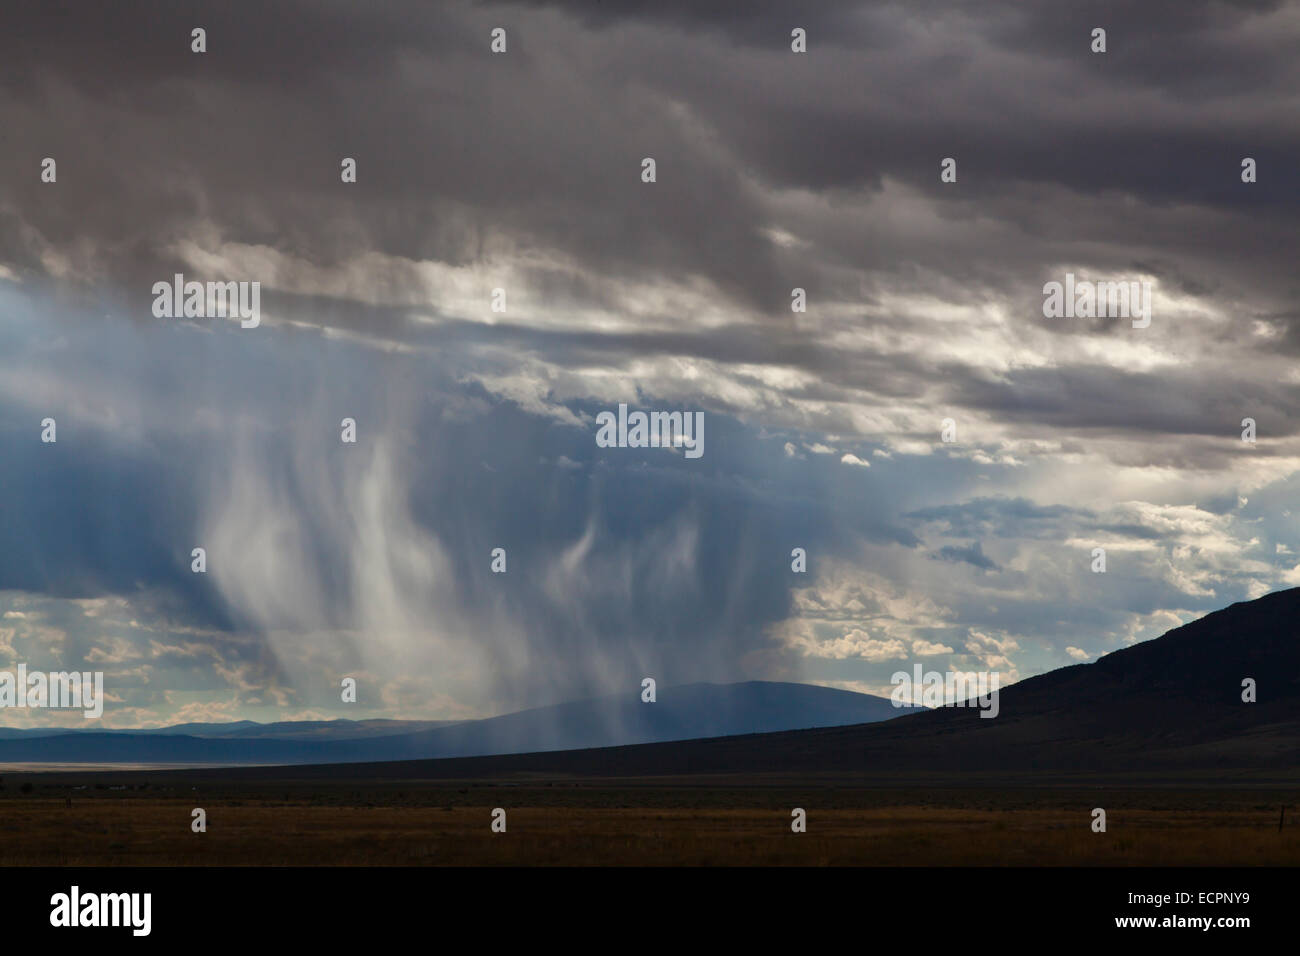 RAIN STORM in the high desert - SOUTHERN, NEW MEXICO Stock Photo